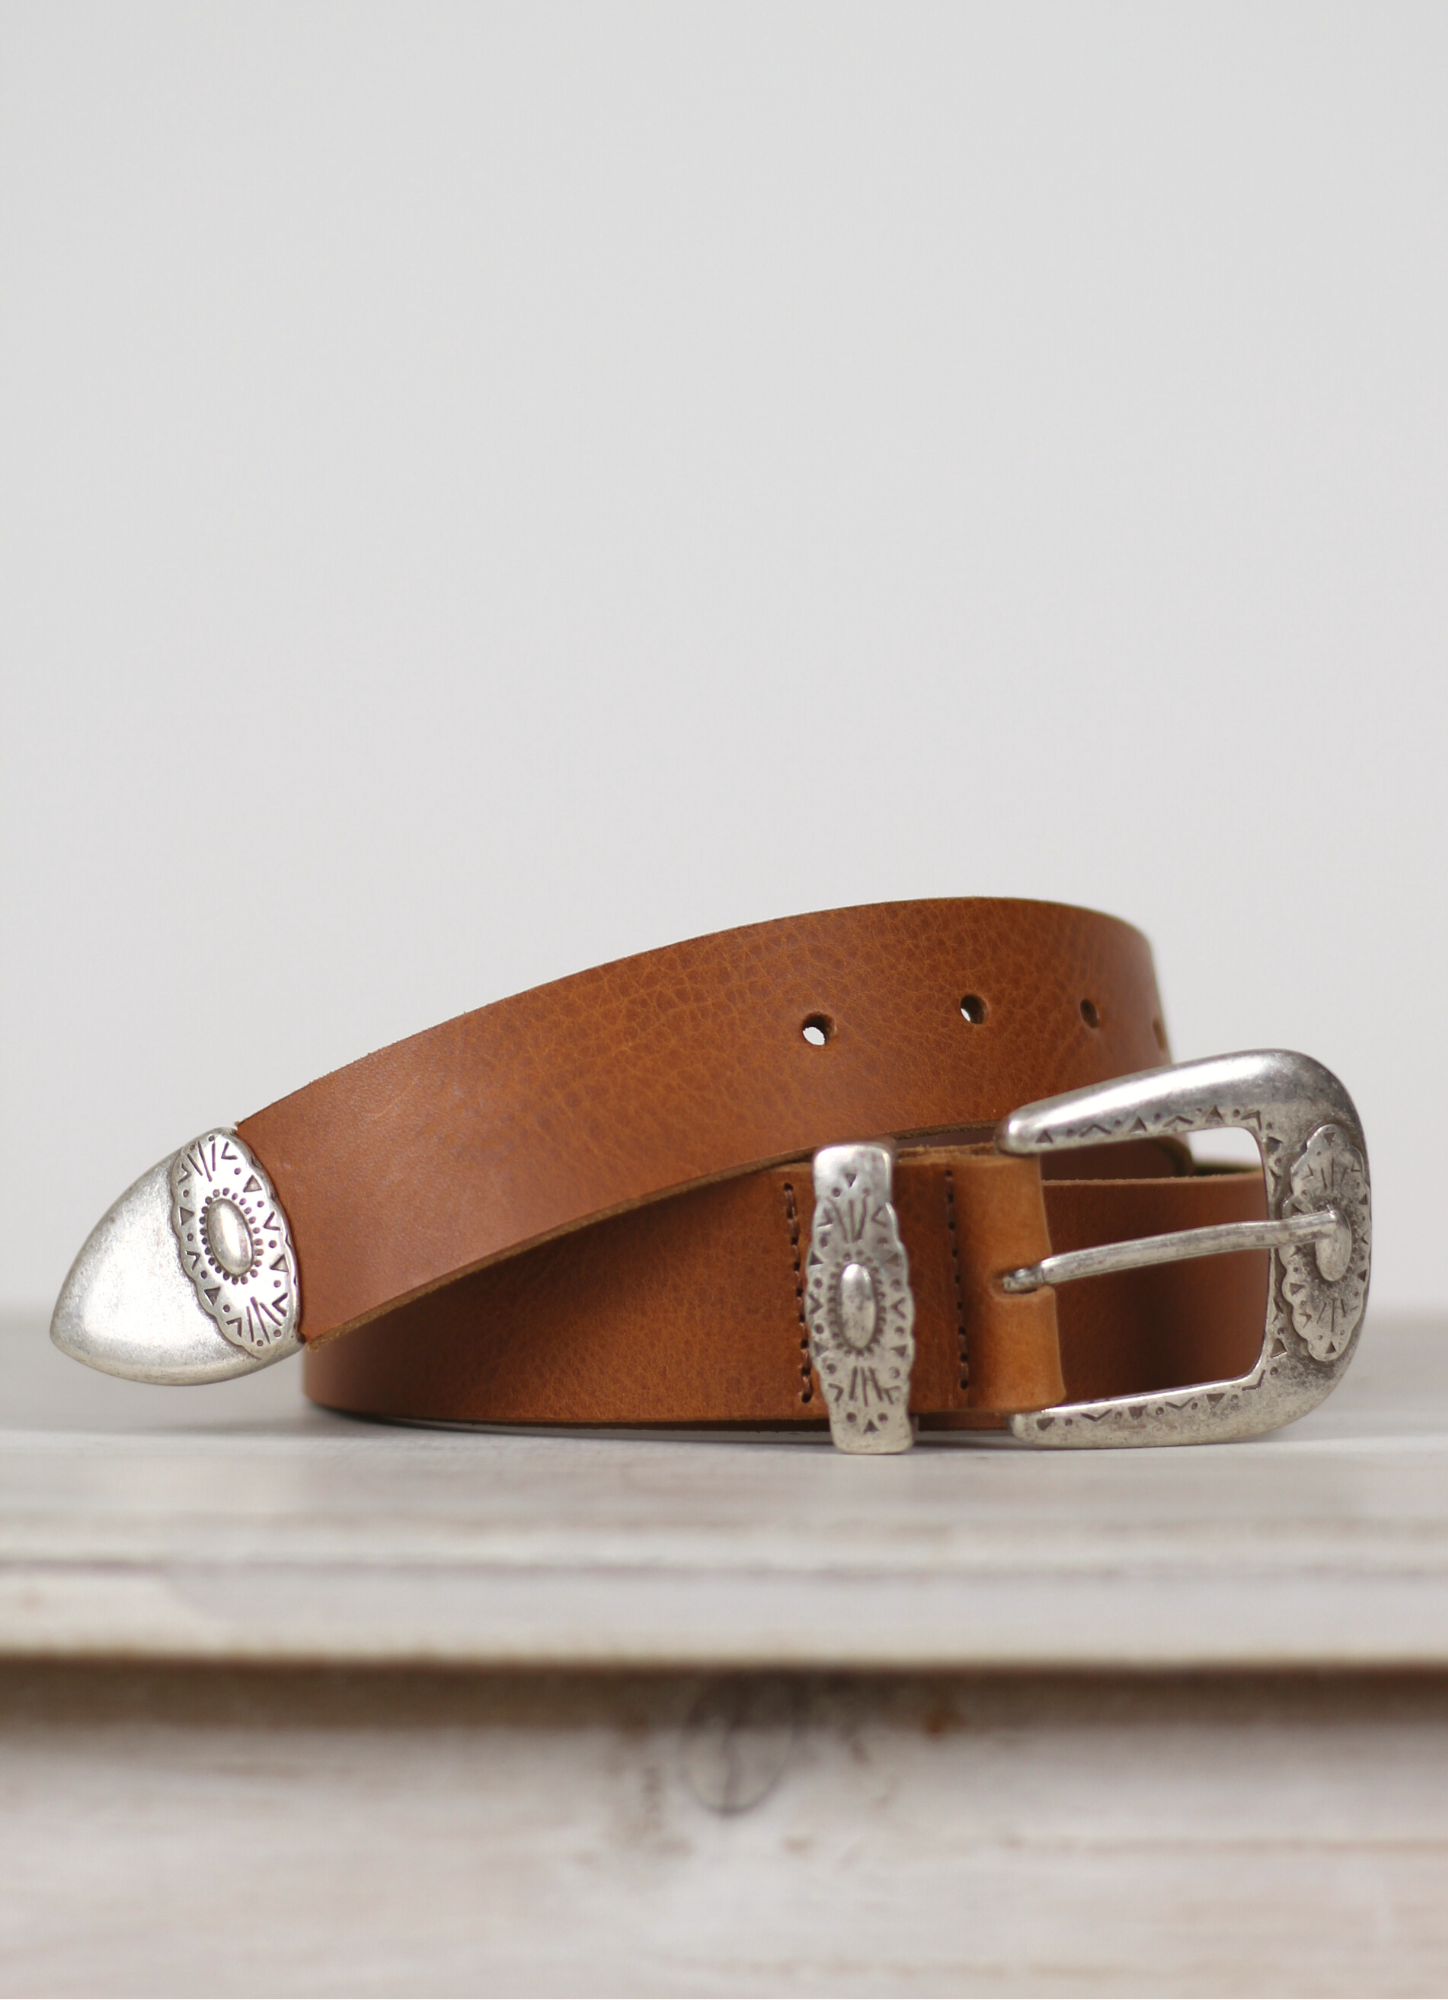 Western inspired leather belt from Spanish brand Mercules. The Fender Belt is cut from a soft brown leather and has a silver coloured buckle and pointer.  A perfect style and width for jeans, this belt can also be styled over dresses and knitwear too.